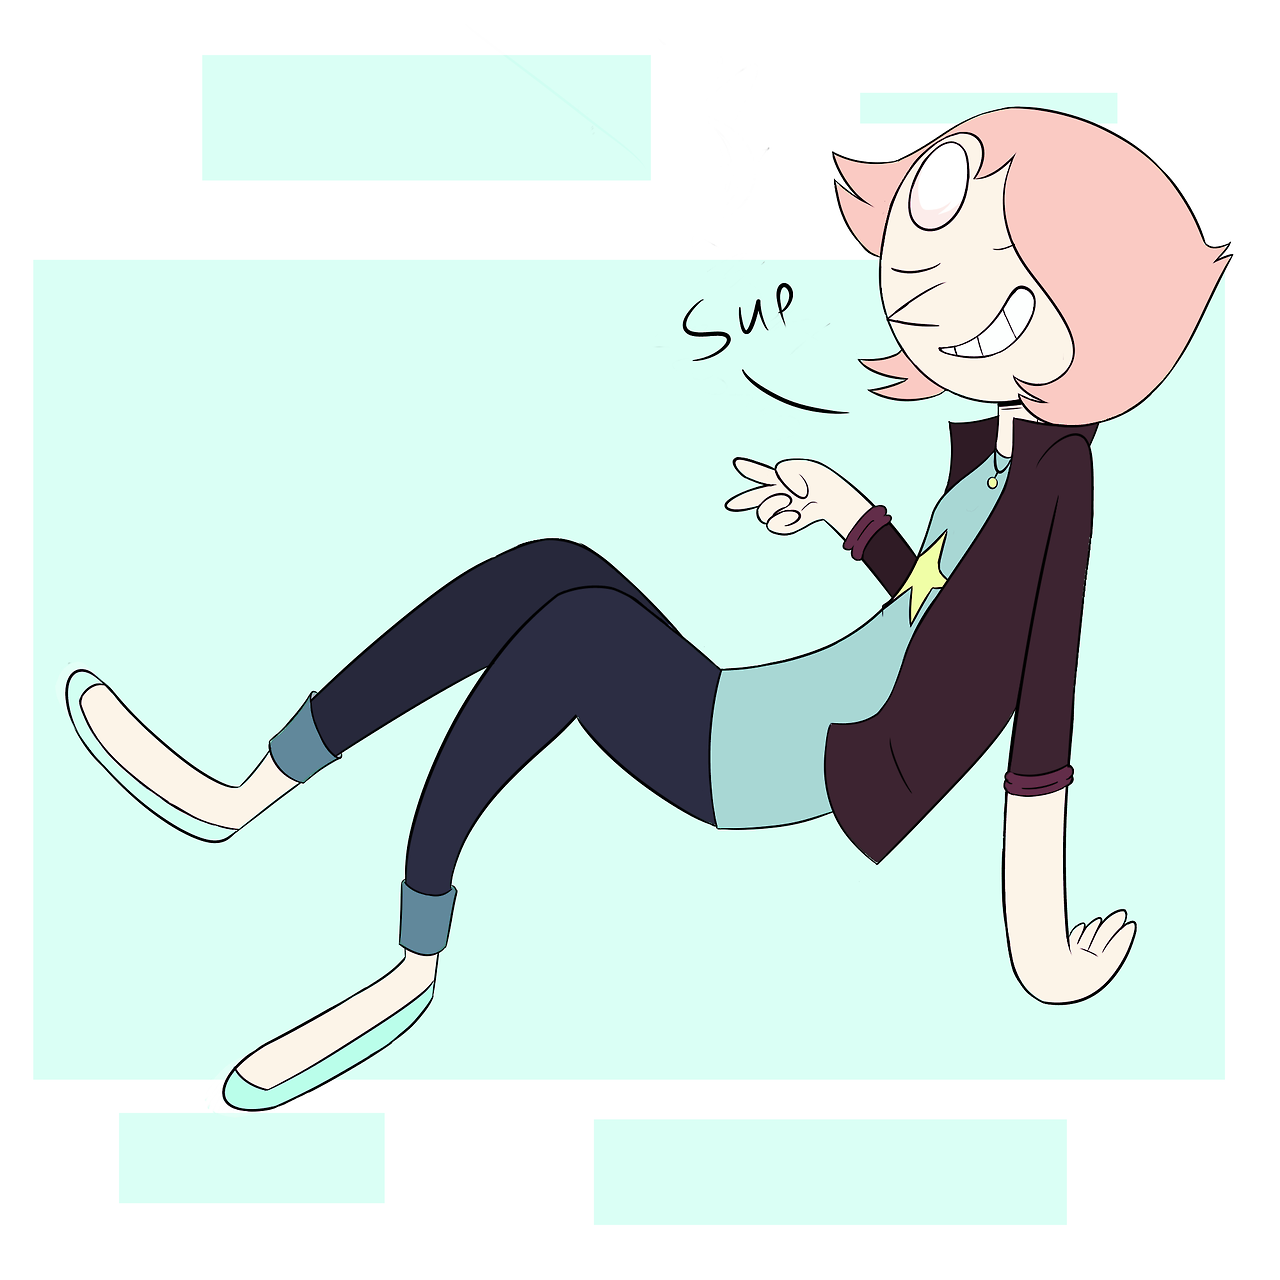 i love su so heres a shity cool pearl